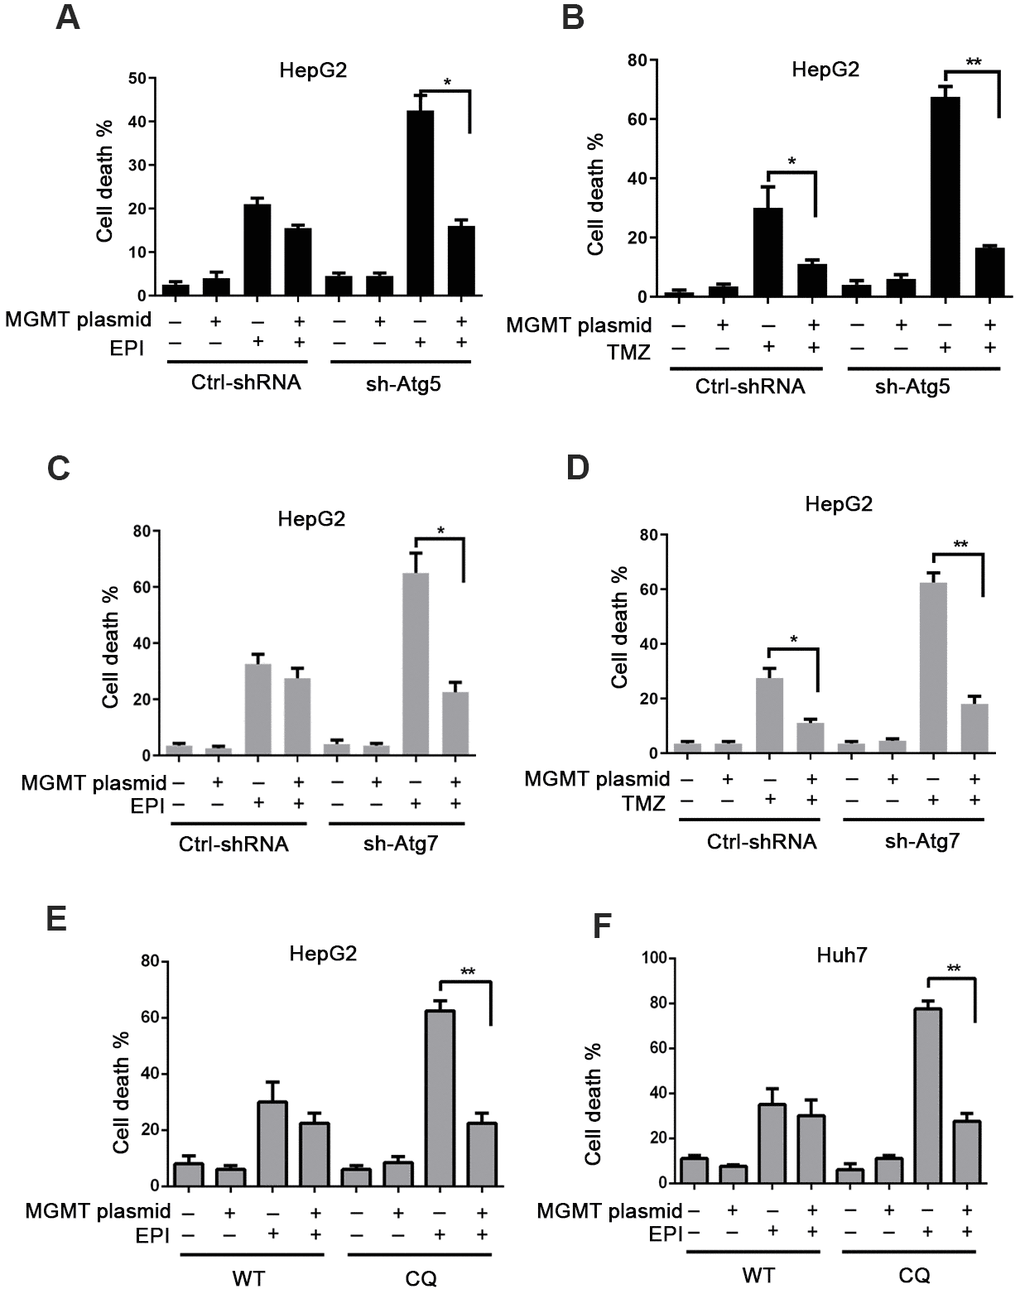 Autophagy deficiency-induced MGMT depletion promotes cytotoxicity. (A) Cell death assessed by flow cytometry (FC) in ctrl-shRNA and sh-Atg5 HepG2 cells overexpressing MGMT, and treated with epirubicin (4 μM) for 24 h. (B) Cell death FC analysis of TMZ (200 μM; 24 h)-treated ctrl-shRNA and sh-Atg5 transfected HepG2 cells overexpressing MGMT. (C, D) Cell death analyzed by FC in HepG2 cells transfected with lentivirus Atg7-shRNA or control vector, overexpressing MGMT, and treated with epirubicin and TMZ. (E, F) CQ was used to inhibit autophagy in HepG2 and Huh7 cells. Cell death was analyzed by FC. HepG2 and Huh7 cells were transfected with MGMT overexpression plasmid, and further exposed to 4 μM of epirubicin for 24 h in the absence and presence of CQ. Data are presented as the mean ±SD (* P≤0.05; ** P≤0.01).